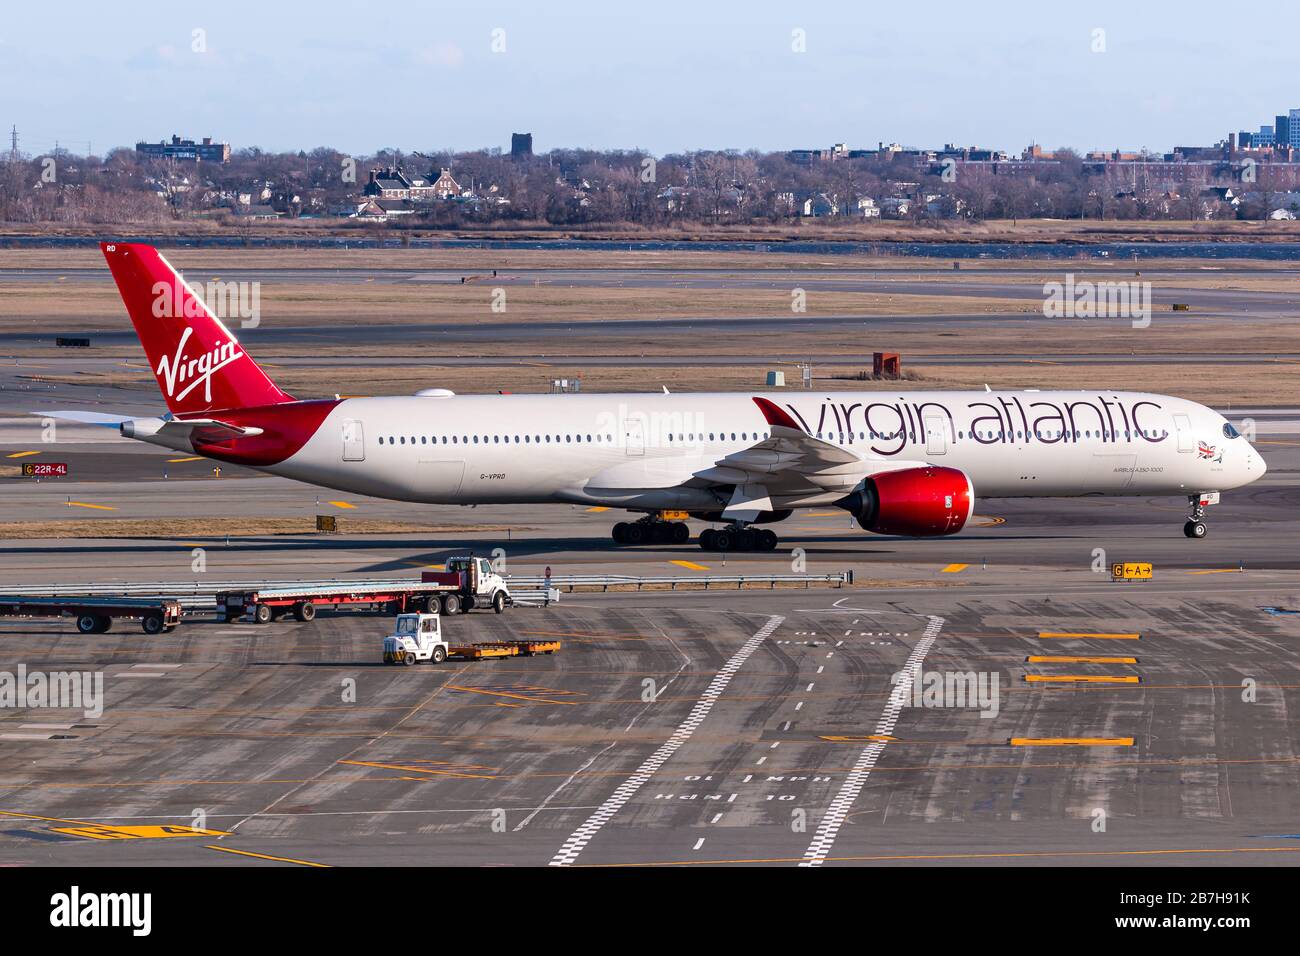 New York, USA - February 27, 2020: Virgin Atlantic Airbus A350-1000 airplane at New York John F. Kennedy airport (JFK) in the USA. Airbus is an aircra Stock Photo